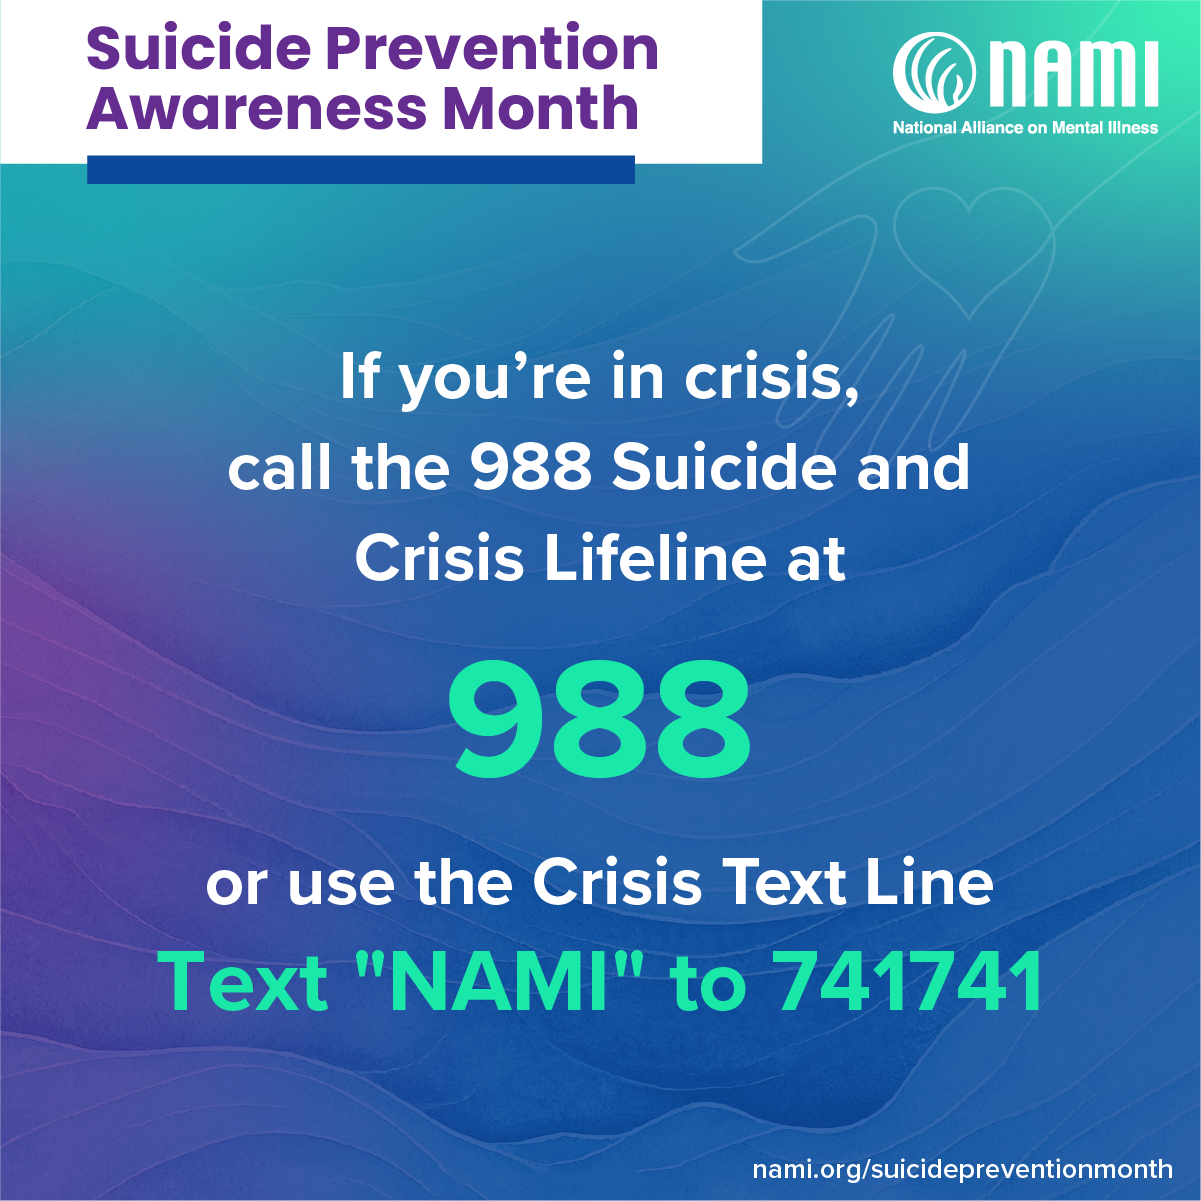 If you're in crisis, call the 988 Suicide and Crisis Lifeline or text NAMI to 741741